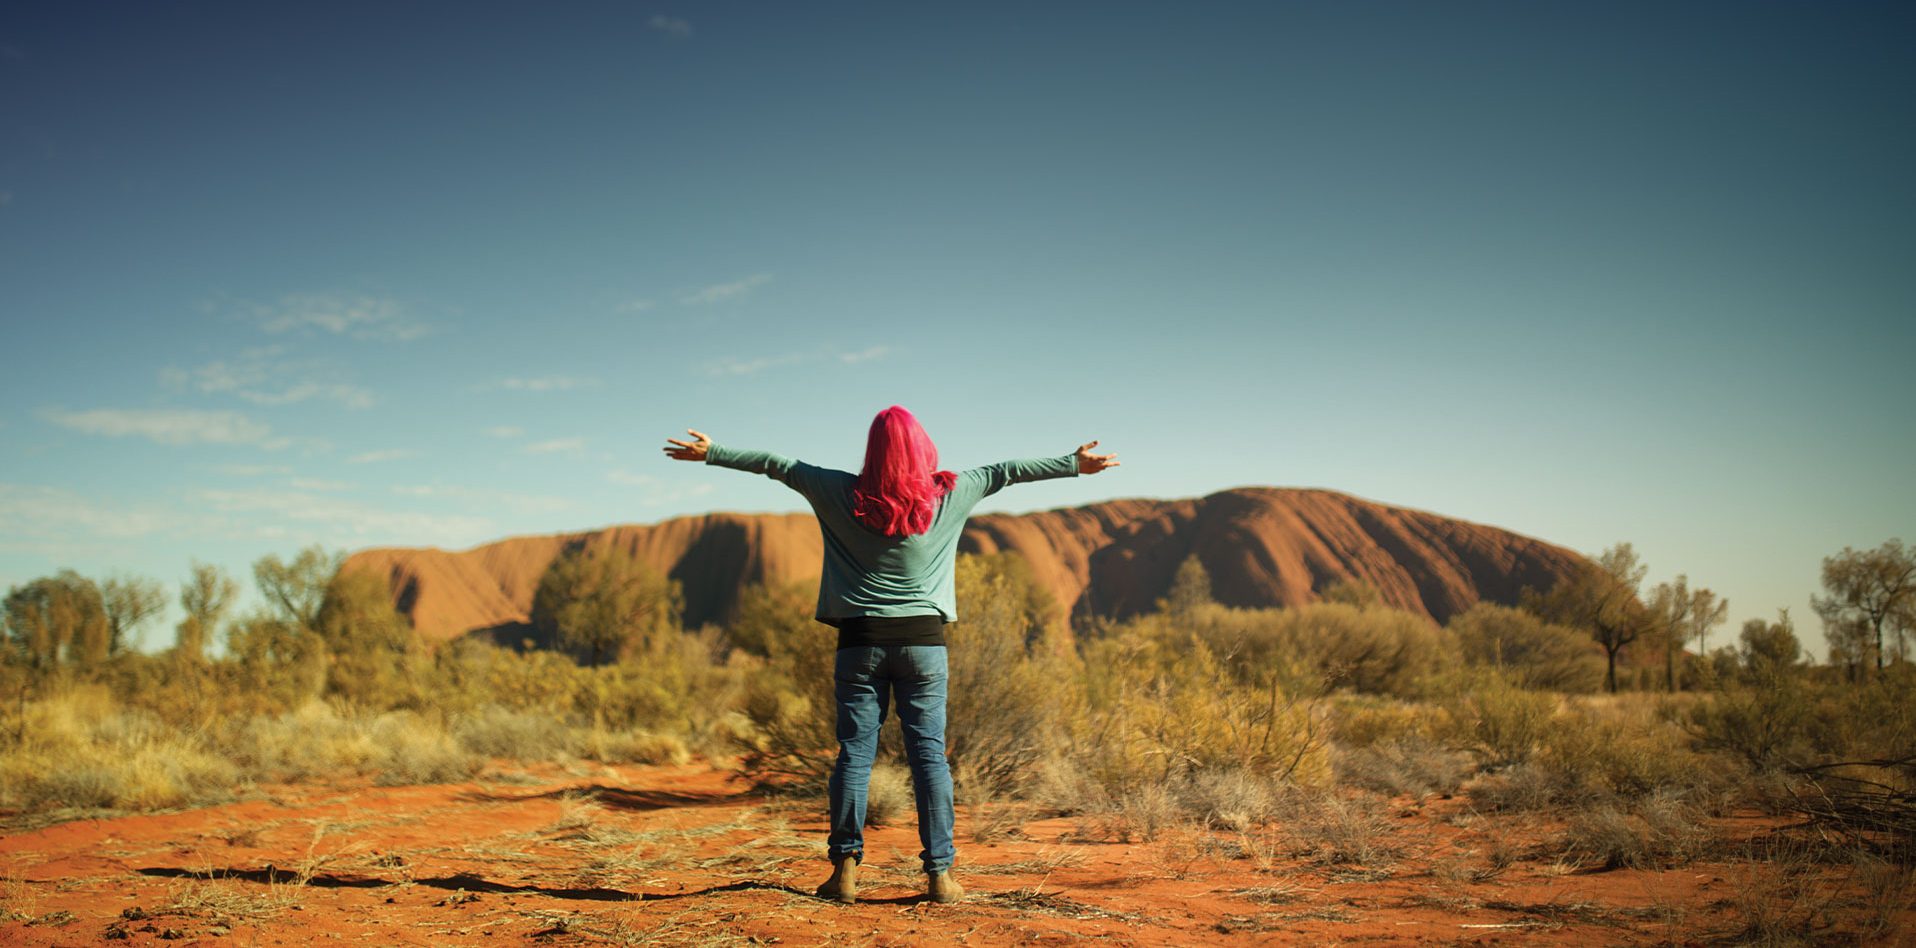 Tourism Central Australia, Get Out There campaign